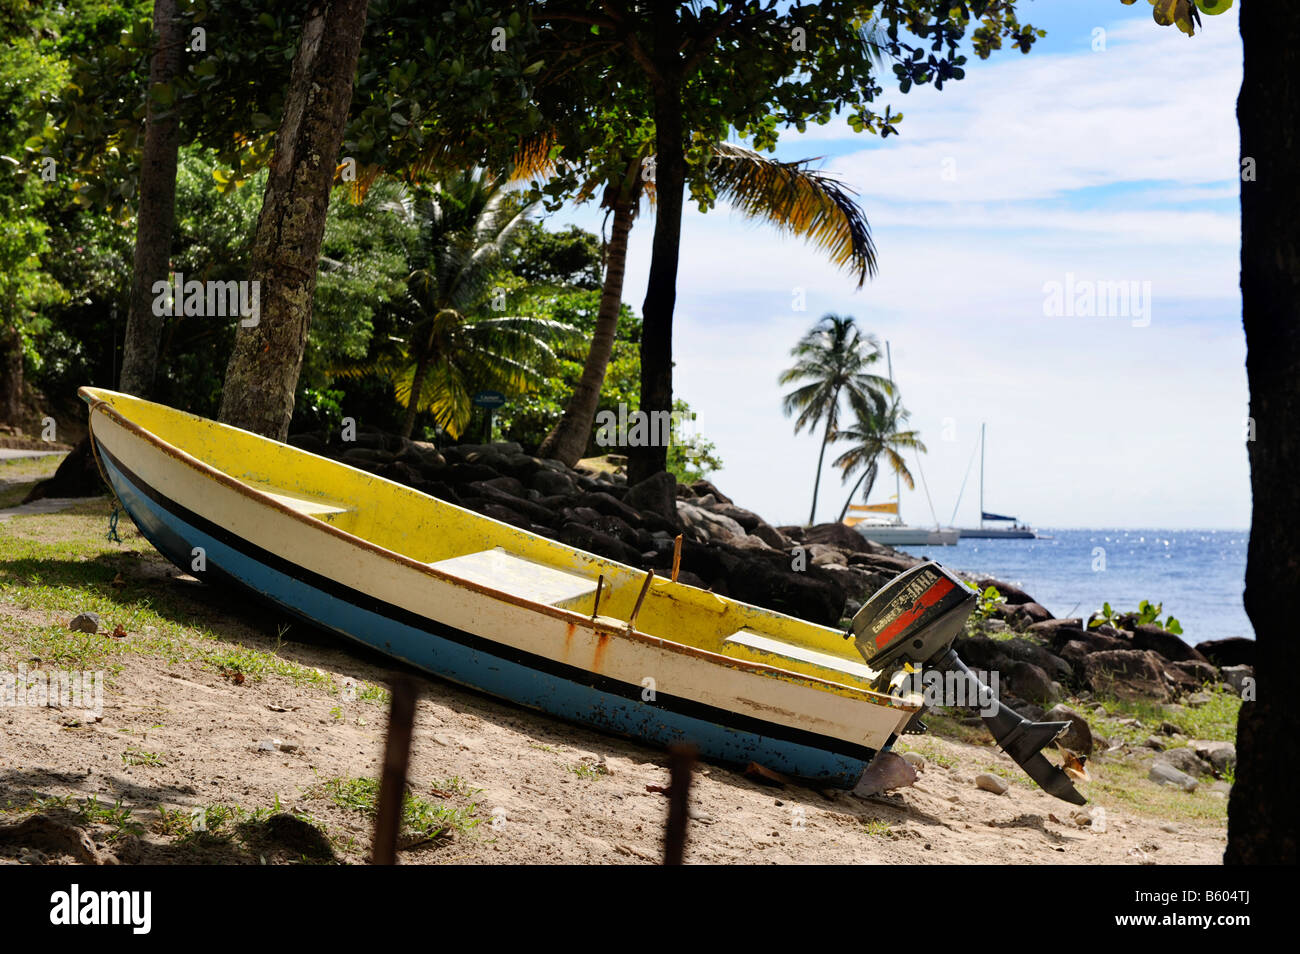 A SMALL FISHING BOAT IN THE COLOURS OF THE ST LUCIAN FLAG BY FORBIDDEN BEACH AT THE JALOUSIE PLANTATION RESORT ST LUCIA Stock Photo